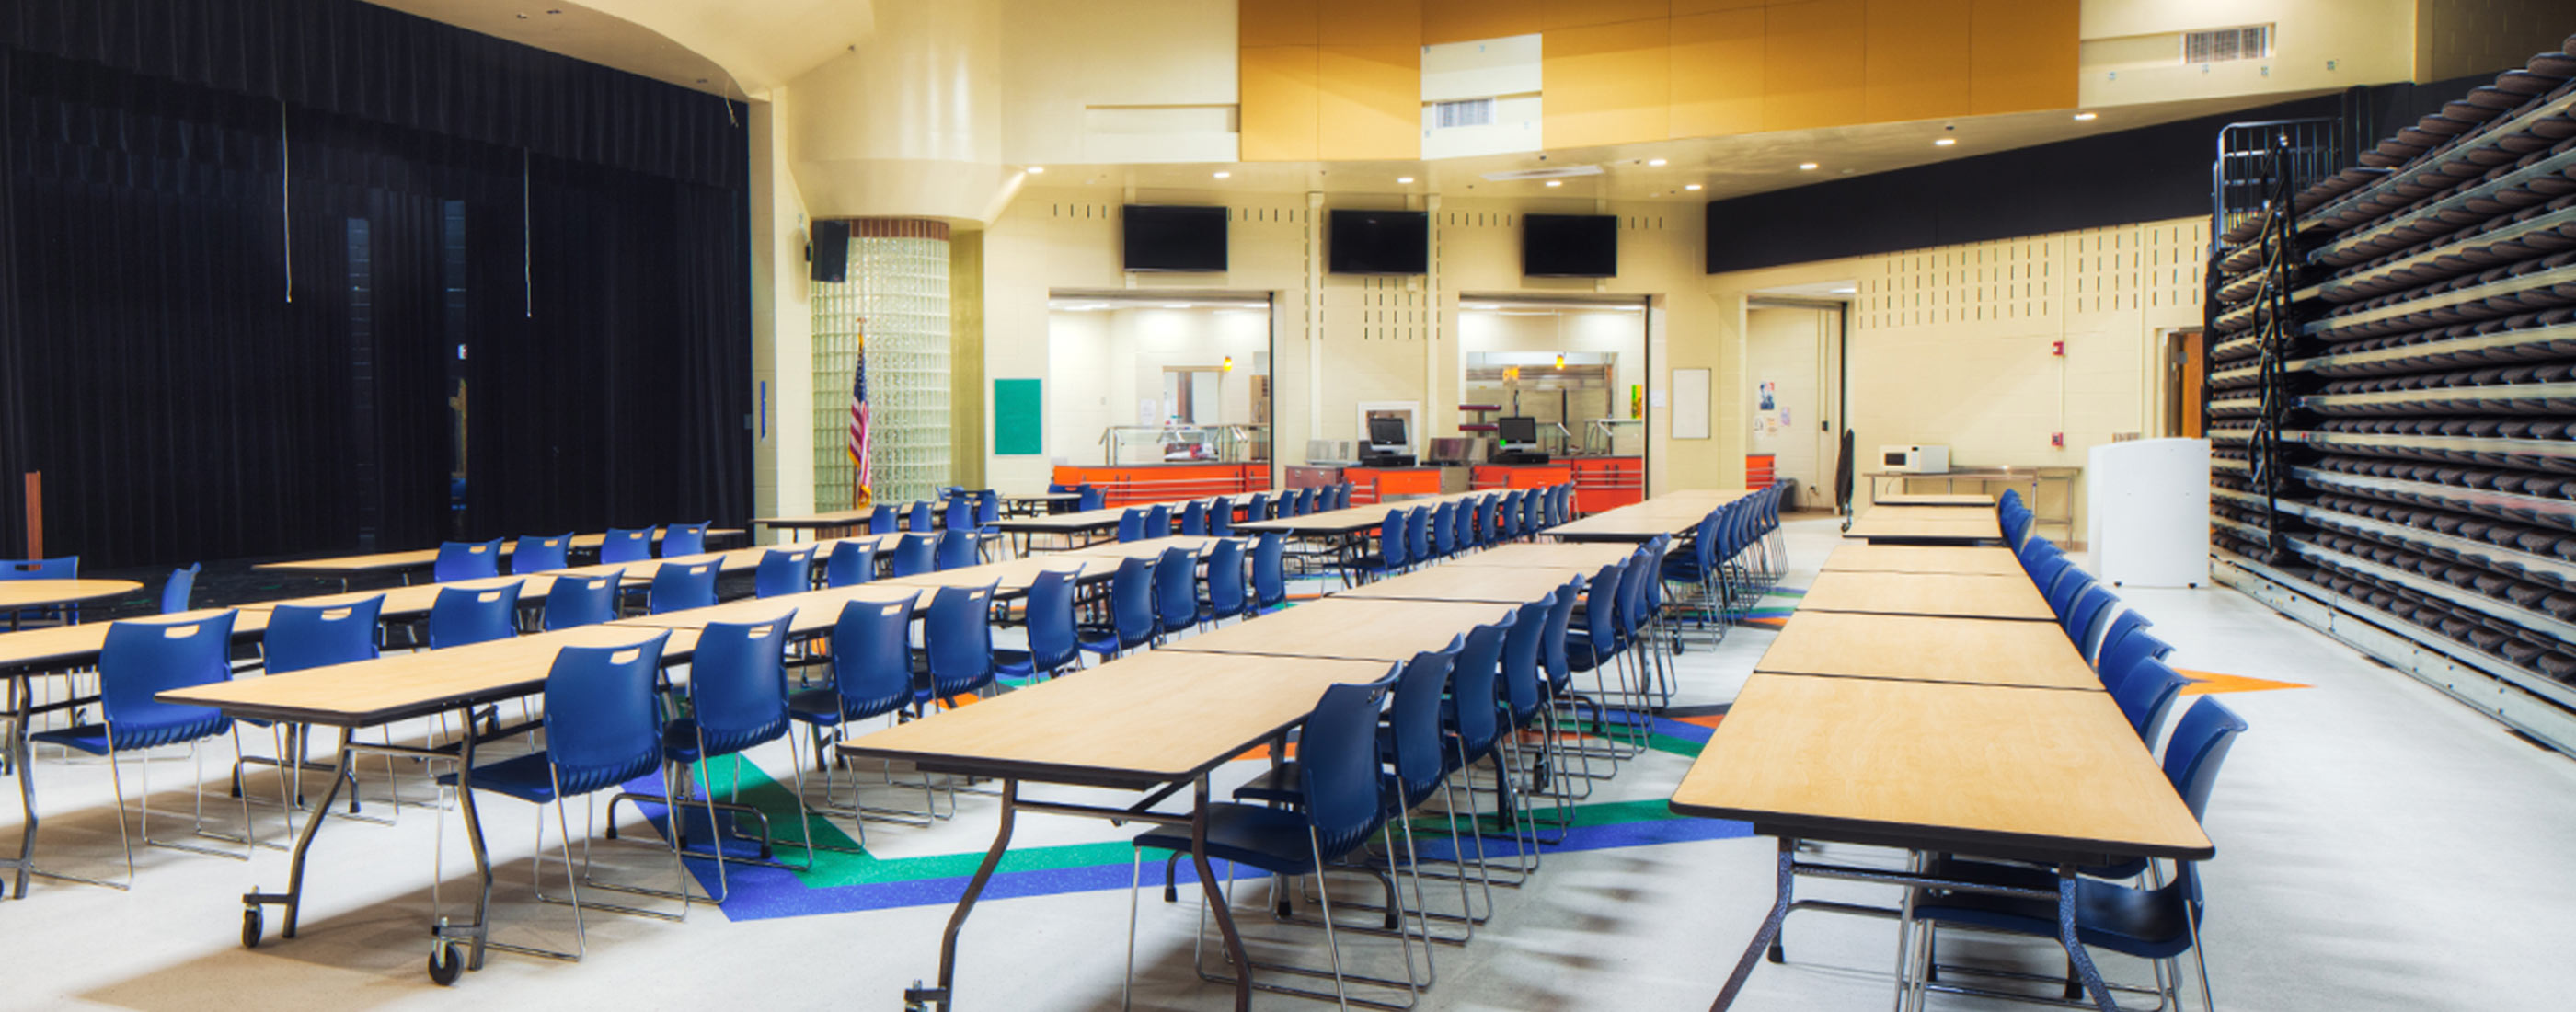 OHM Advisors helped re-design this combined cafeteria and assembly space, in West Liberty-Salem Local School District’s campus.